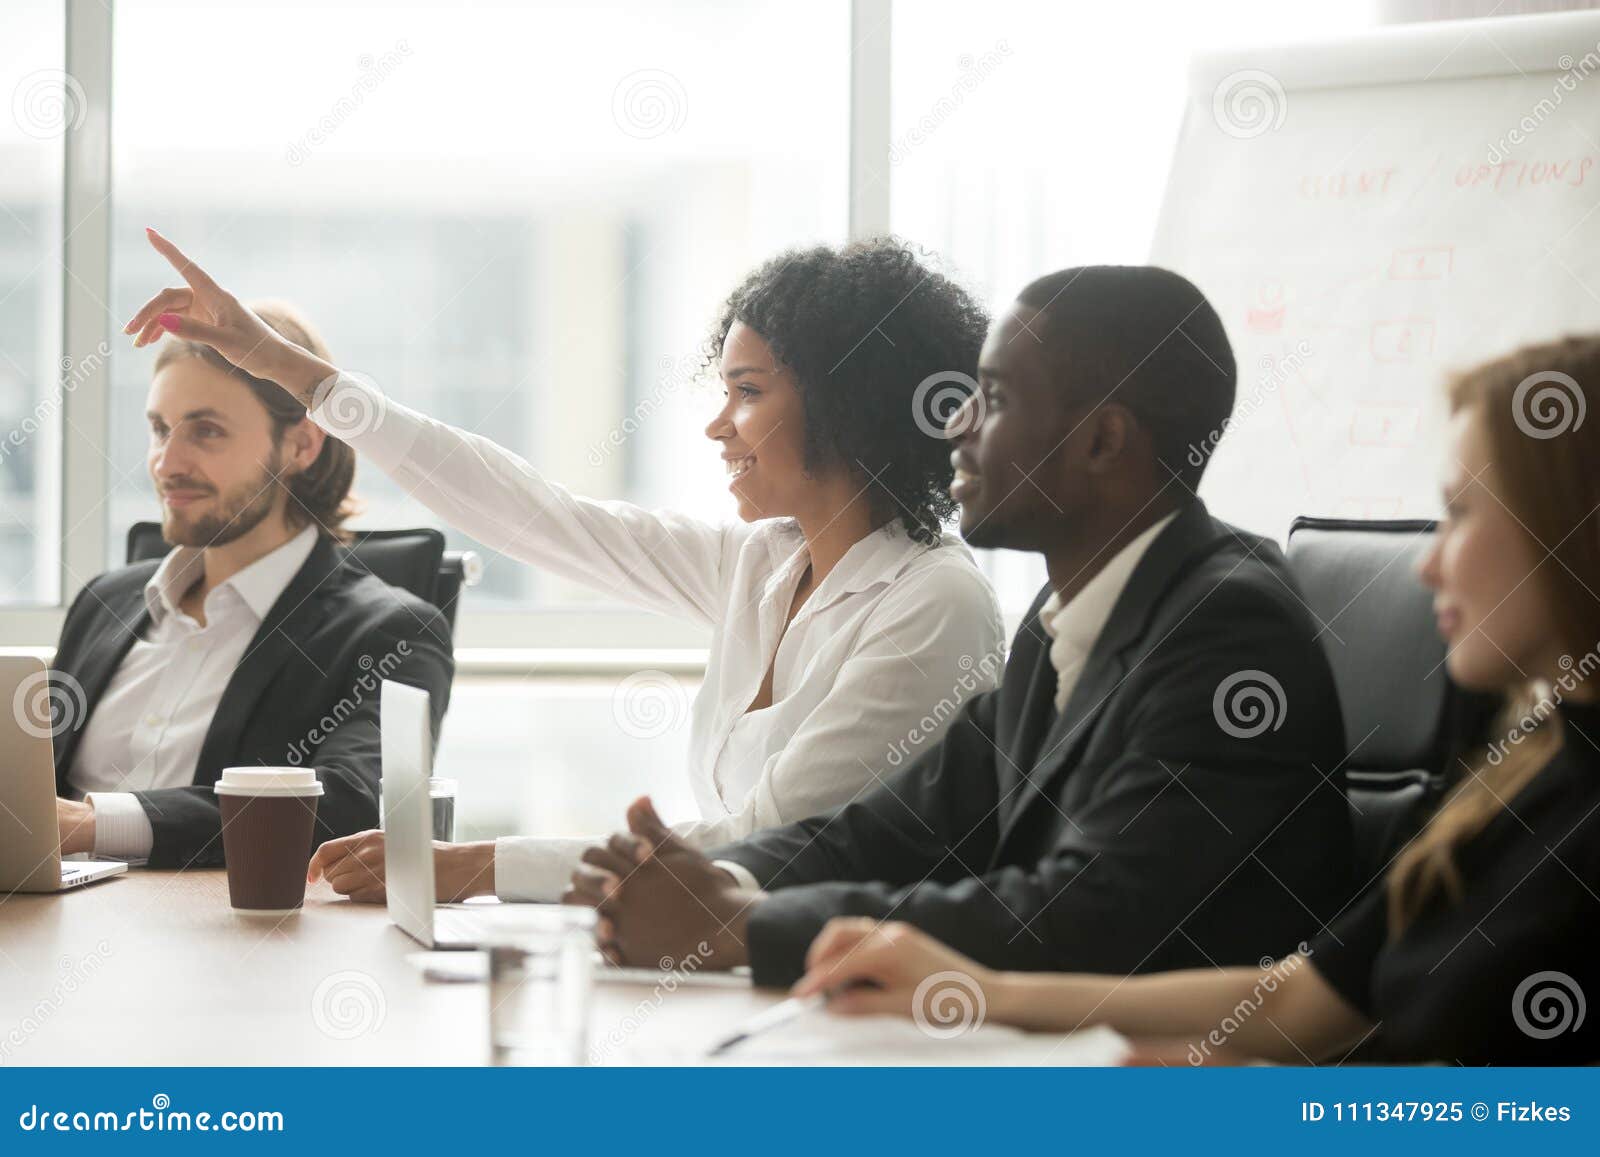 african woman raising hand to ask question at team training